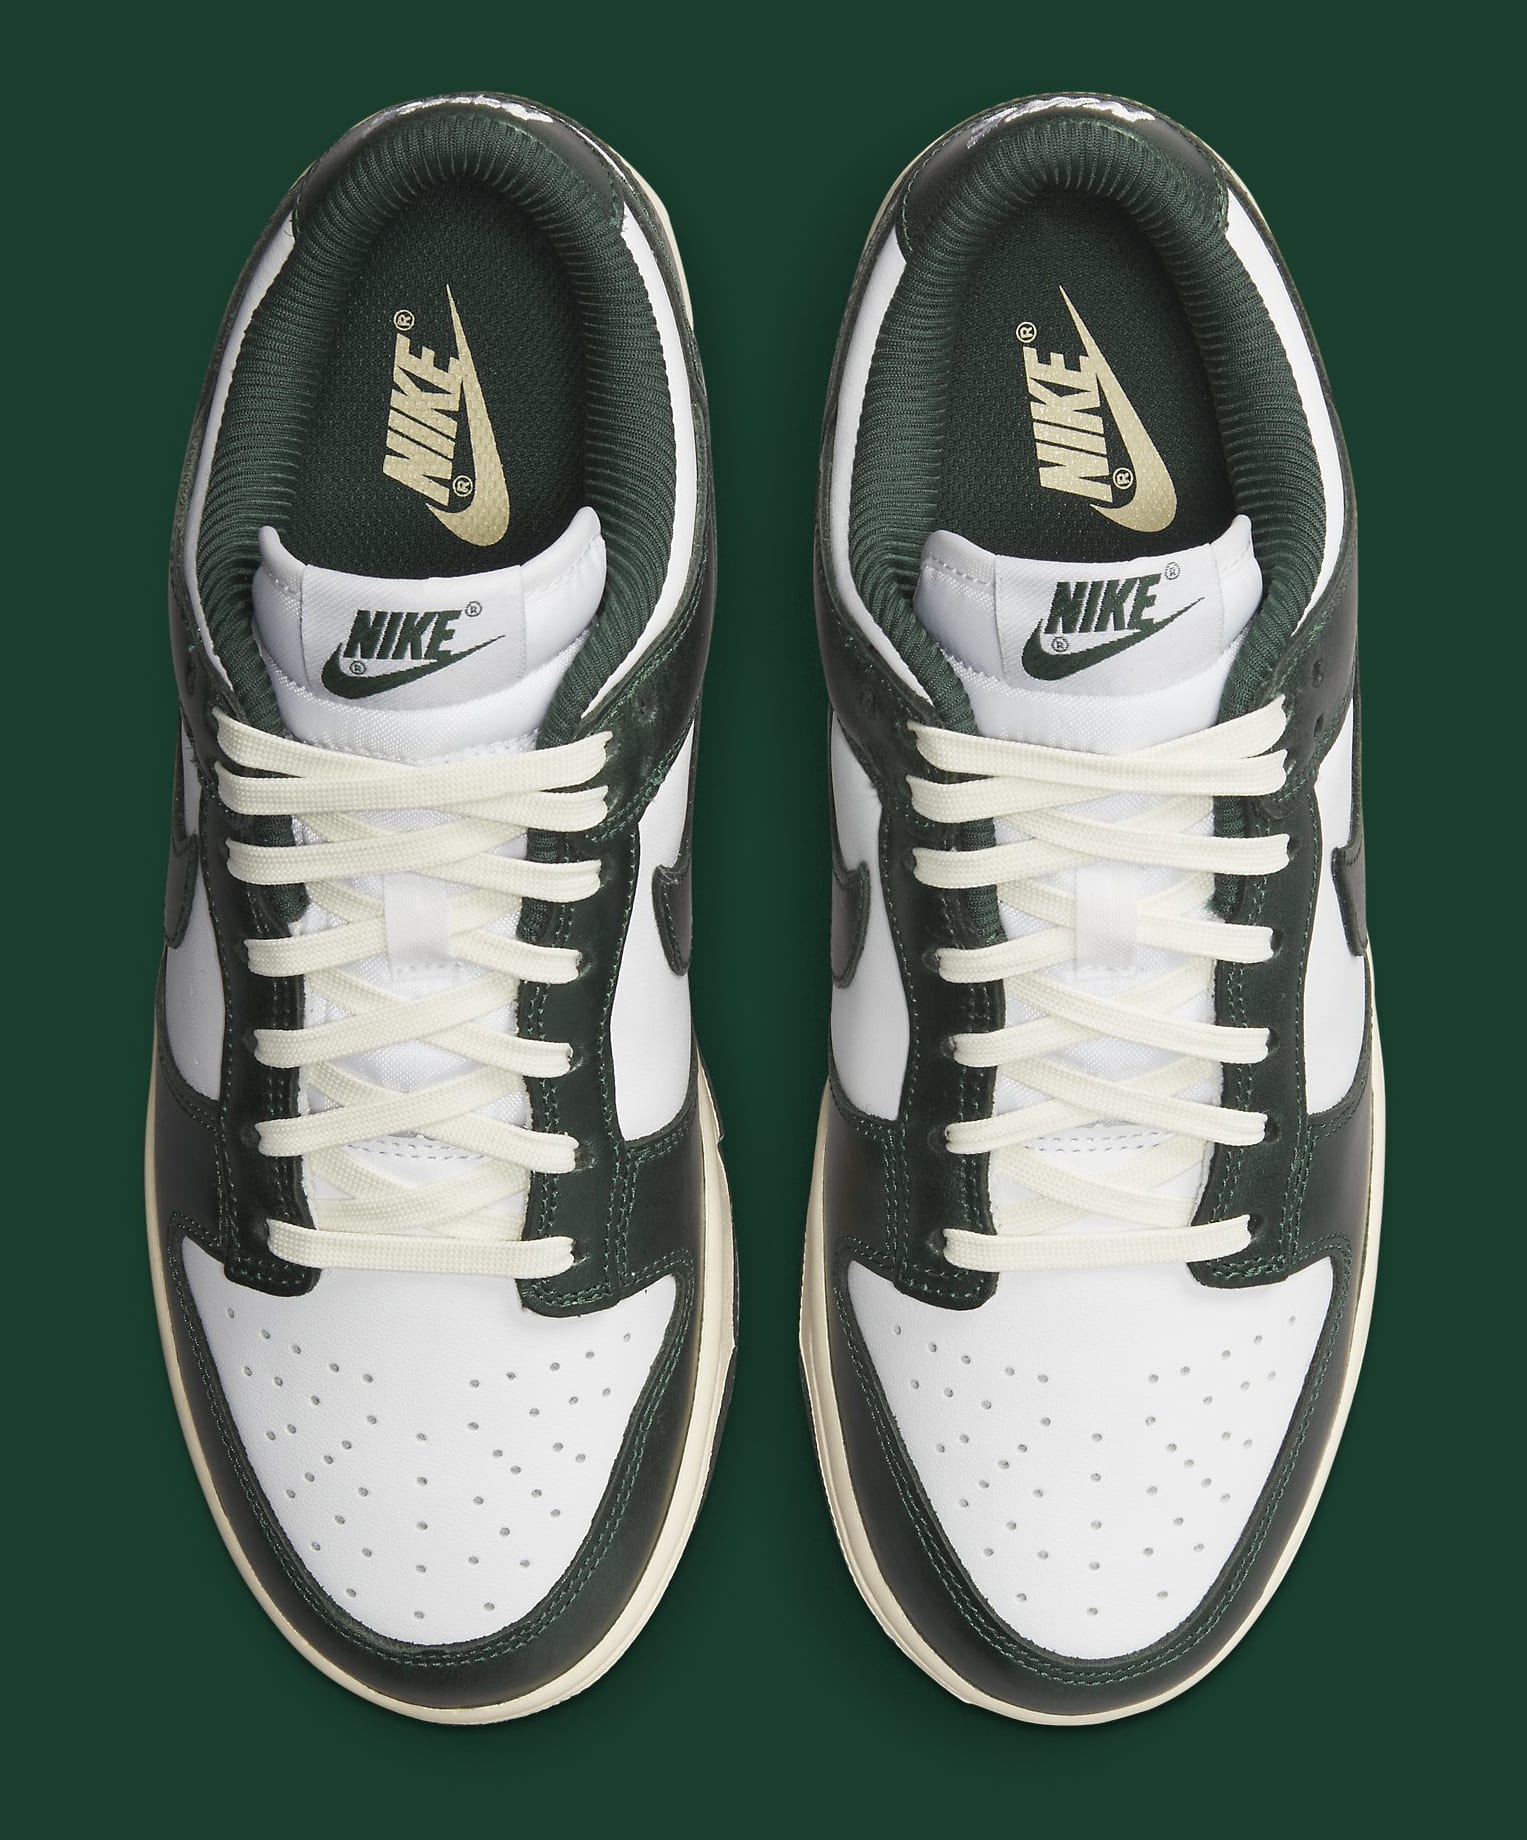 Another Vintage-Inspired Nike Dunk Is Releasing Soon | Complex